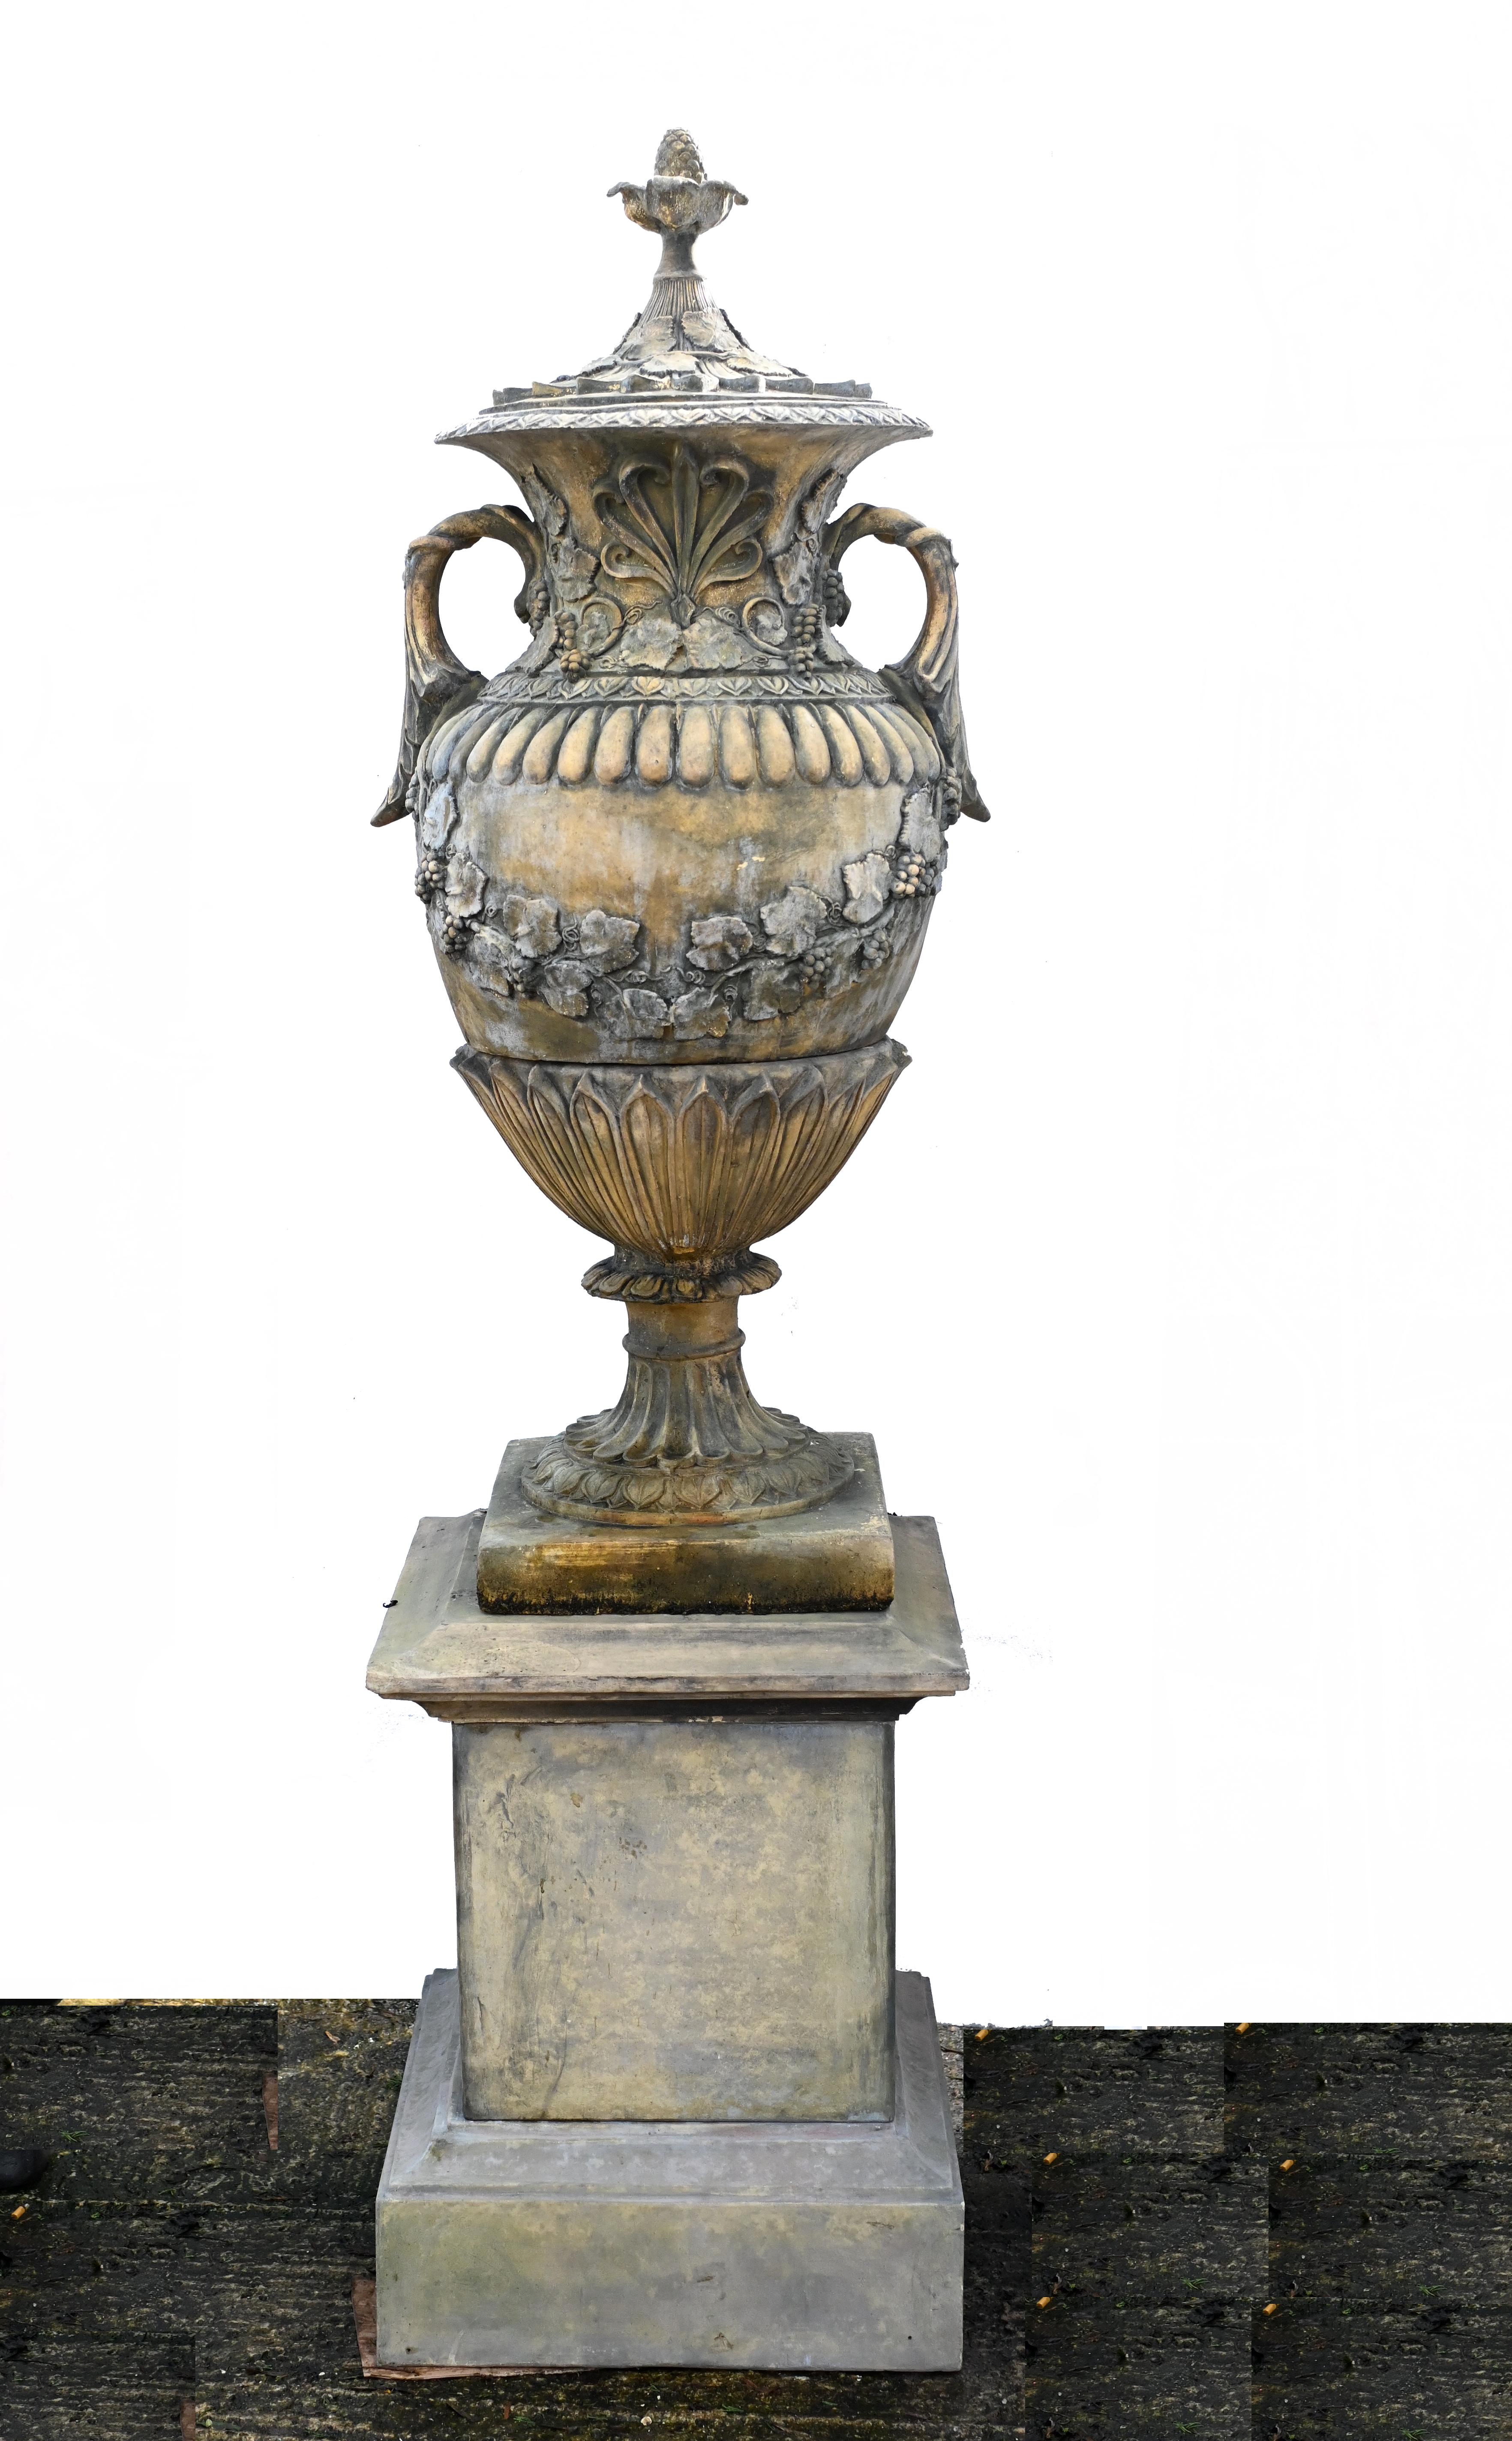 Stunning pair of large English stone garden urns of amphora form
Stand on the square pedestal bases
Overall height is eight feet tall - 243 CM - so good size 
The urns come in three parts and also are separate to the square pedestal bases
Wonderful